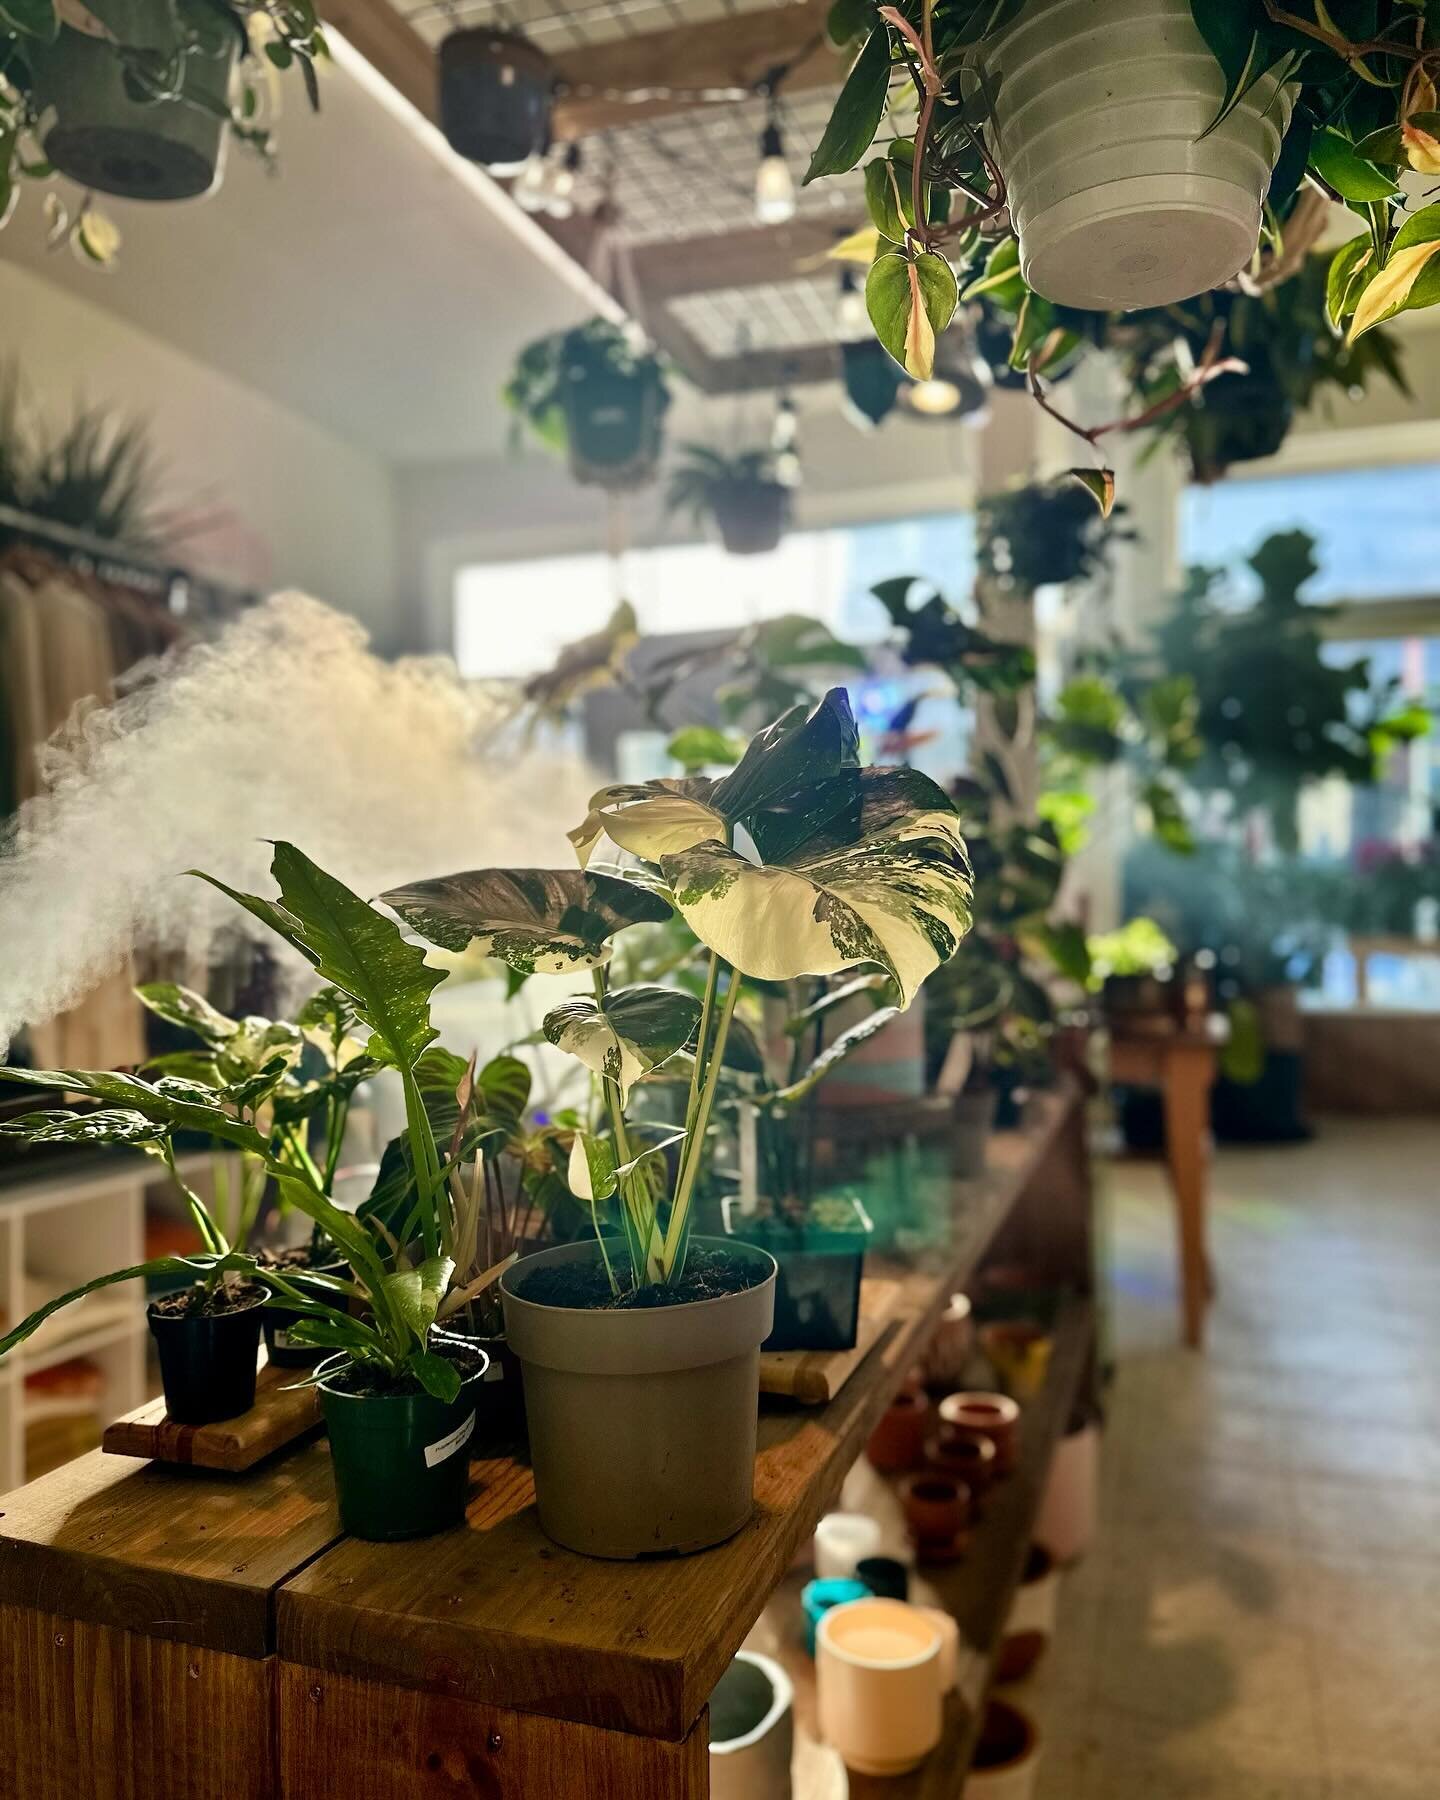 I am so in love with this shop 😍🪴💚 

Thanks for a wonderful week!! New plant shipment will be here tomorrow, so stop in on Tuesday to check out all the new babies!!

#elizabethcity #smallbusiness #plantshop #plants #jungle #junglevibes #plantaddic